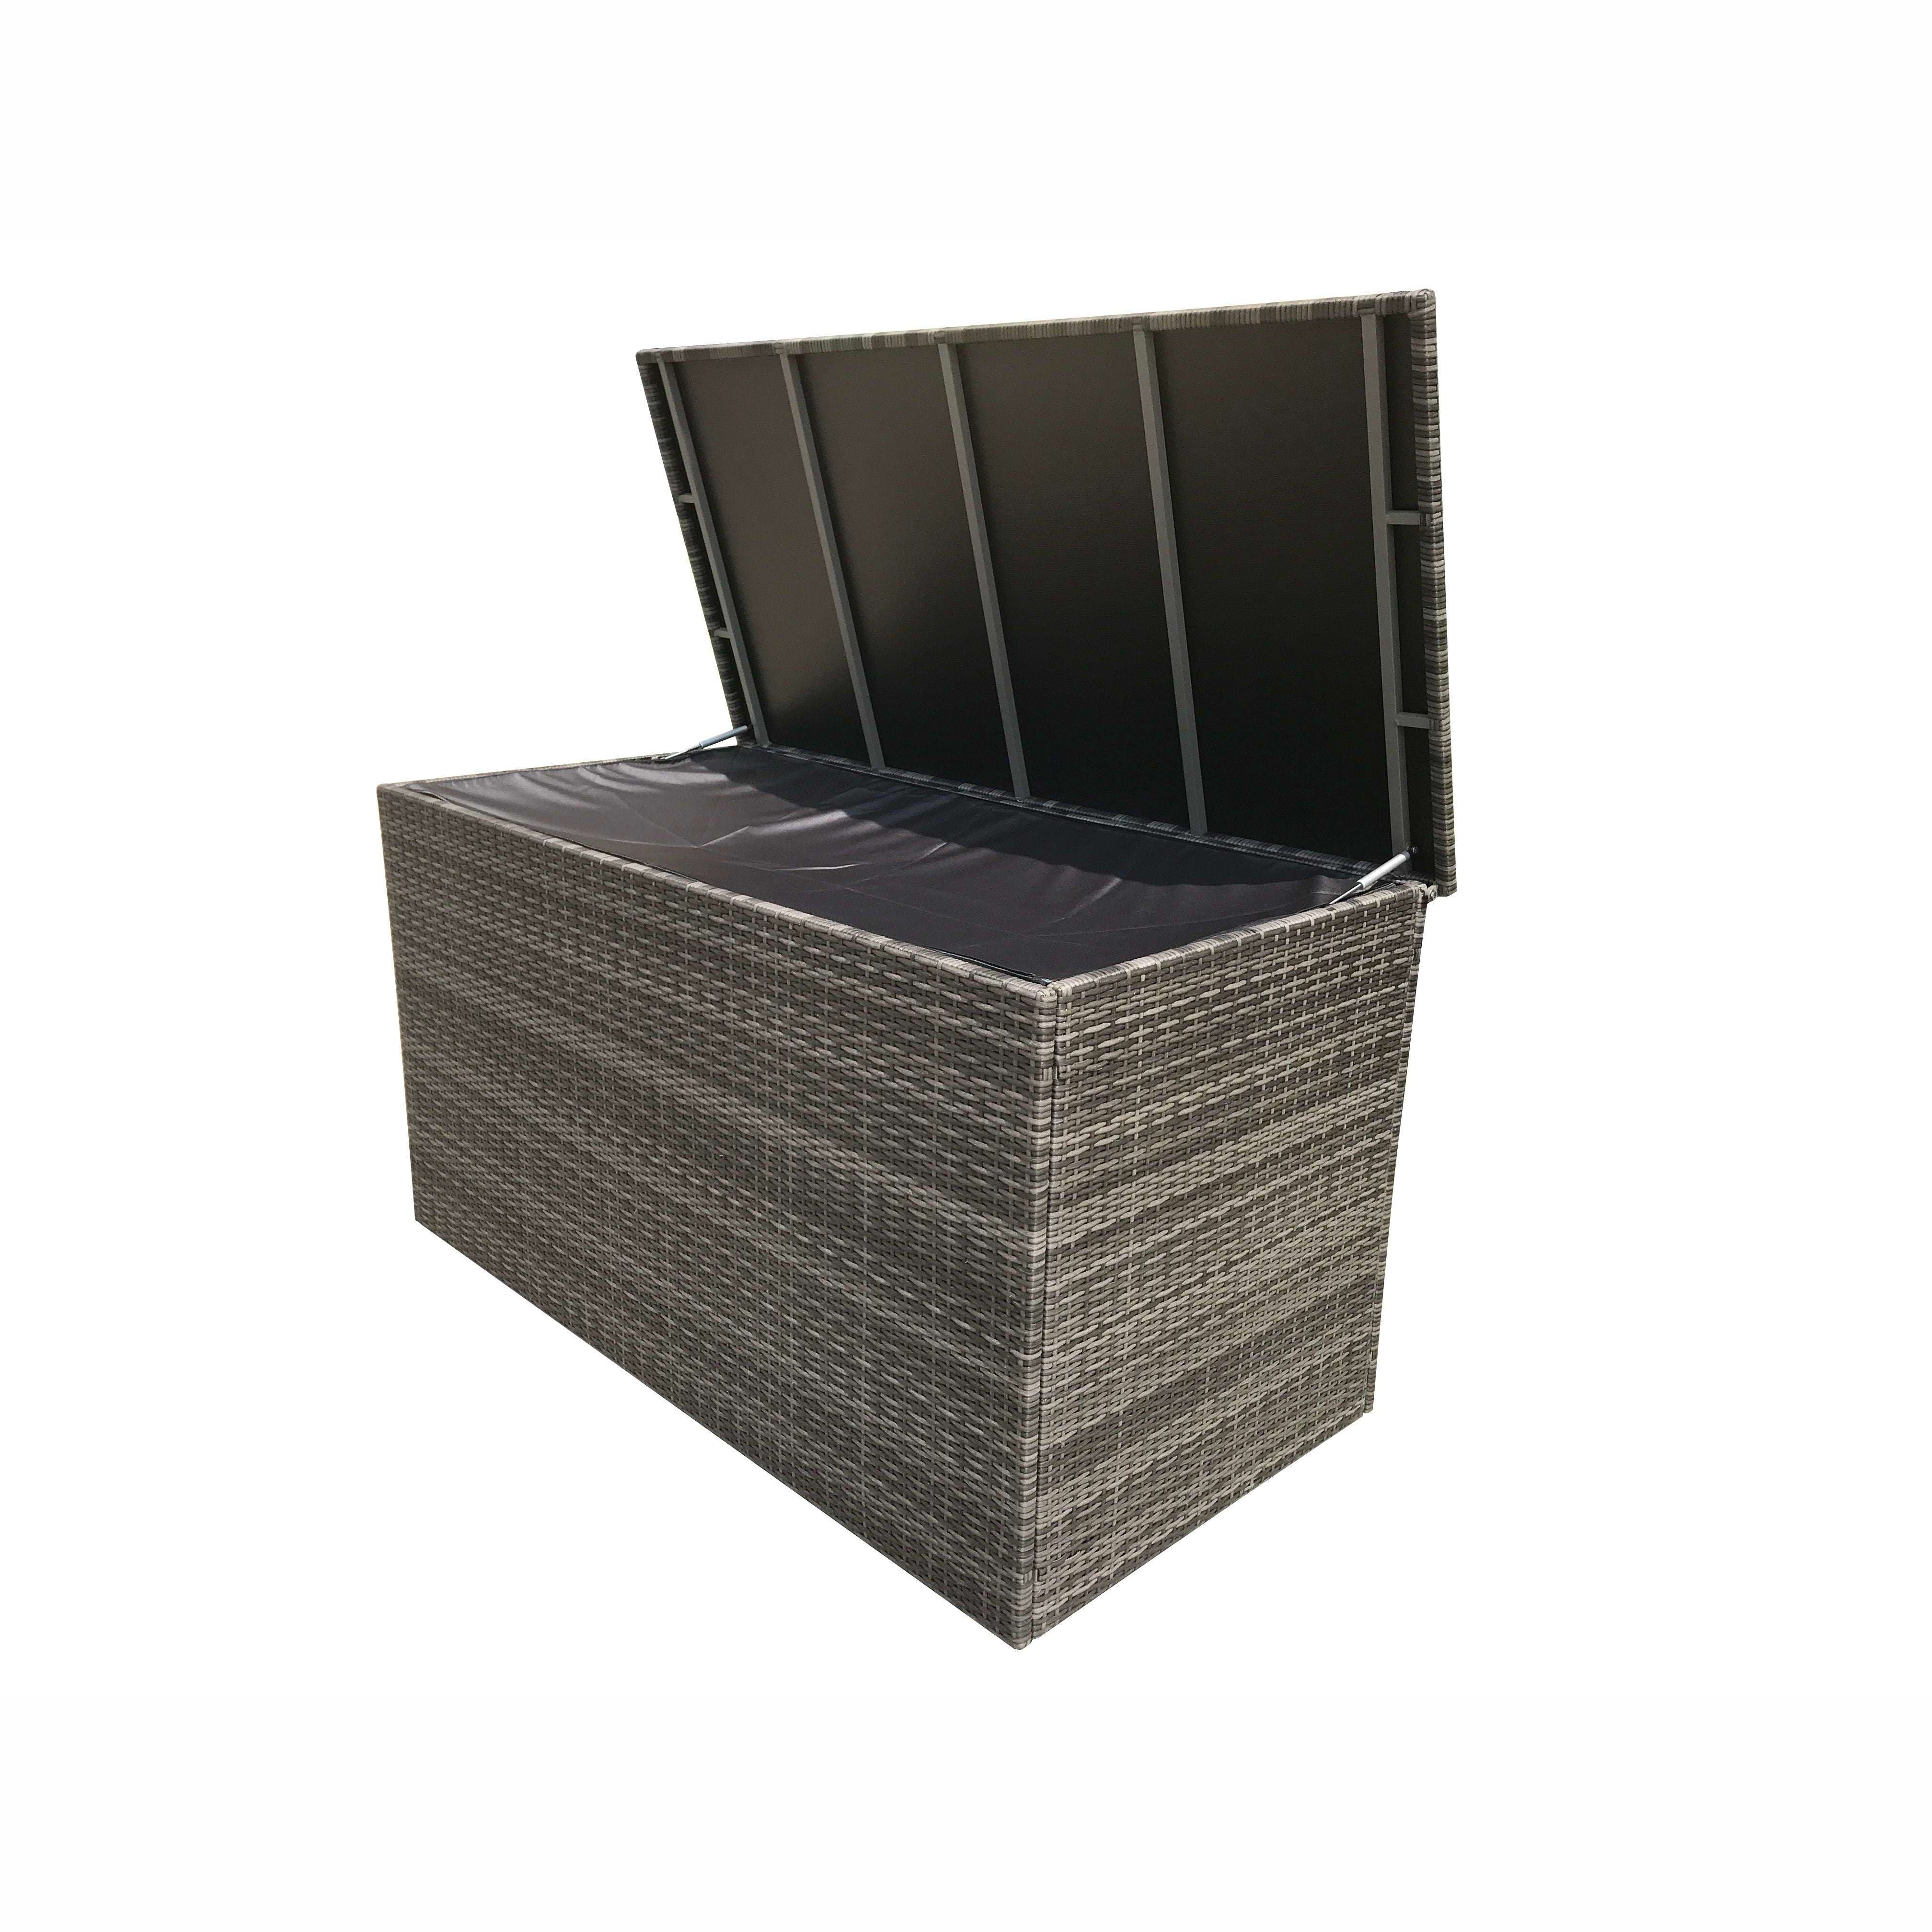 Exceptional Garden:Signature Weave Cushion Box - Large Flat Grey Weave